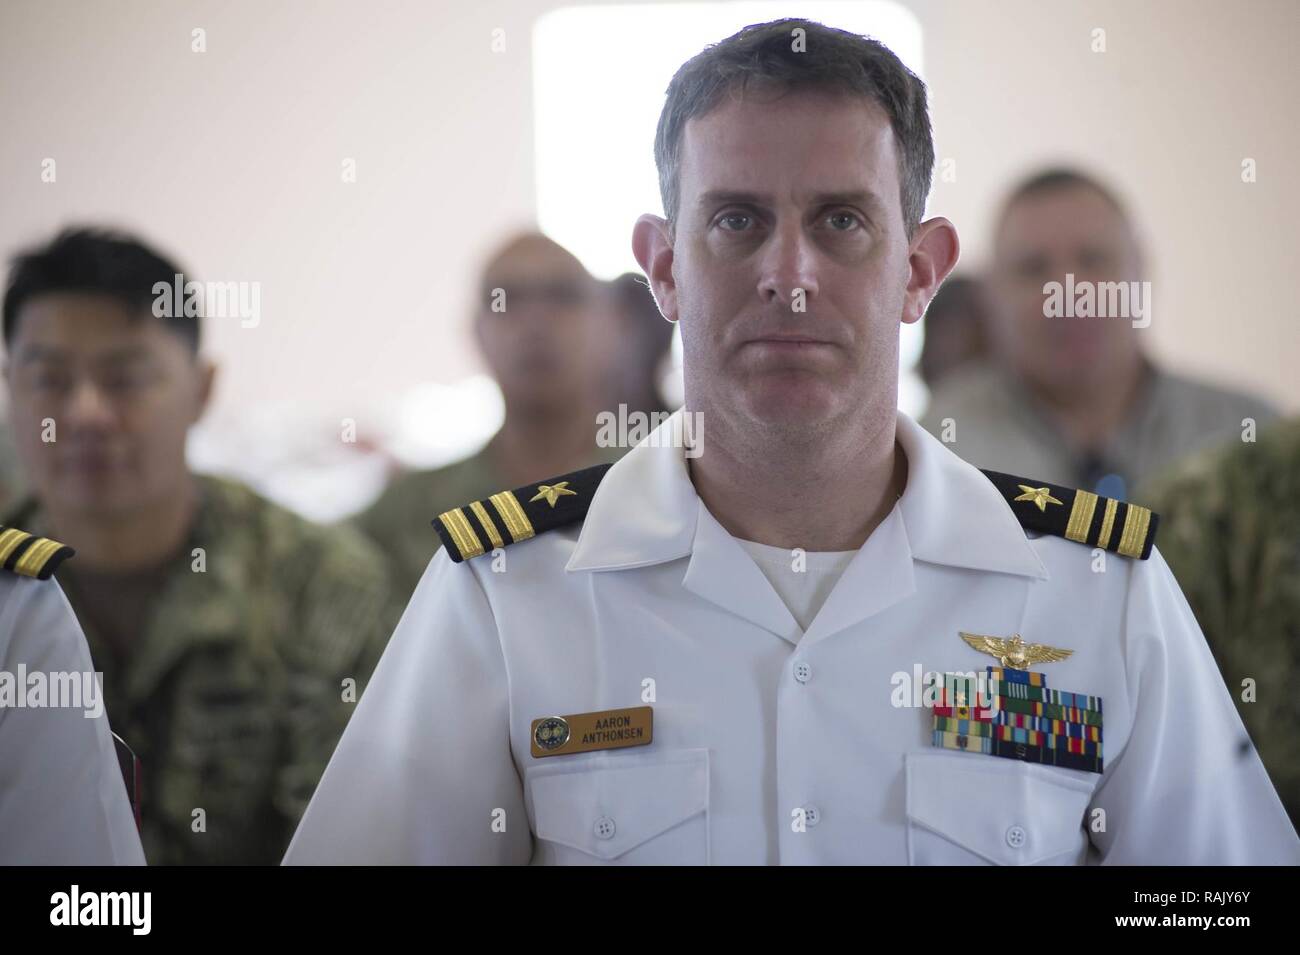 U.S. Navy Lt. Cmdr. Aaron Anthonsen, Officer in Charge of Exercise Control Group, attends the Exercise Cutlass Express 2017 closing ceremony at a Djibouti Coast Guard base in Djibouti City, Djibouti, Feb. 8, 2017. Exercise Cutlass Express 2017, sponsored by U.S. Africa Command and conducted by U.S. Naval Forces Africa, is designed to assess and improve combined maritime law enforcement capacity and promote national and regional security in East Africa. Stock Photo